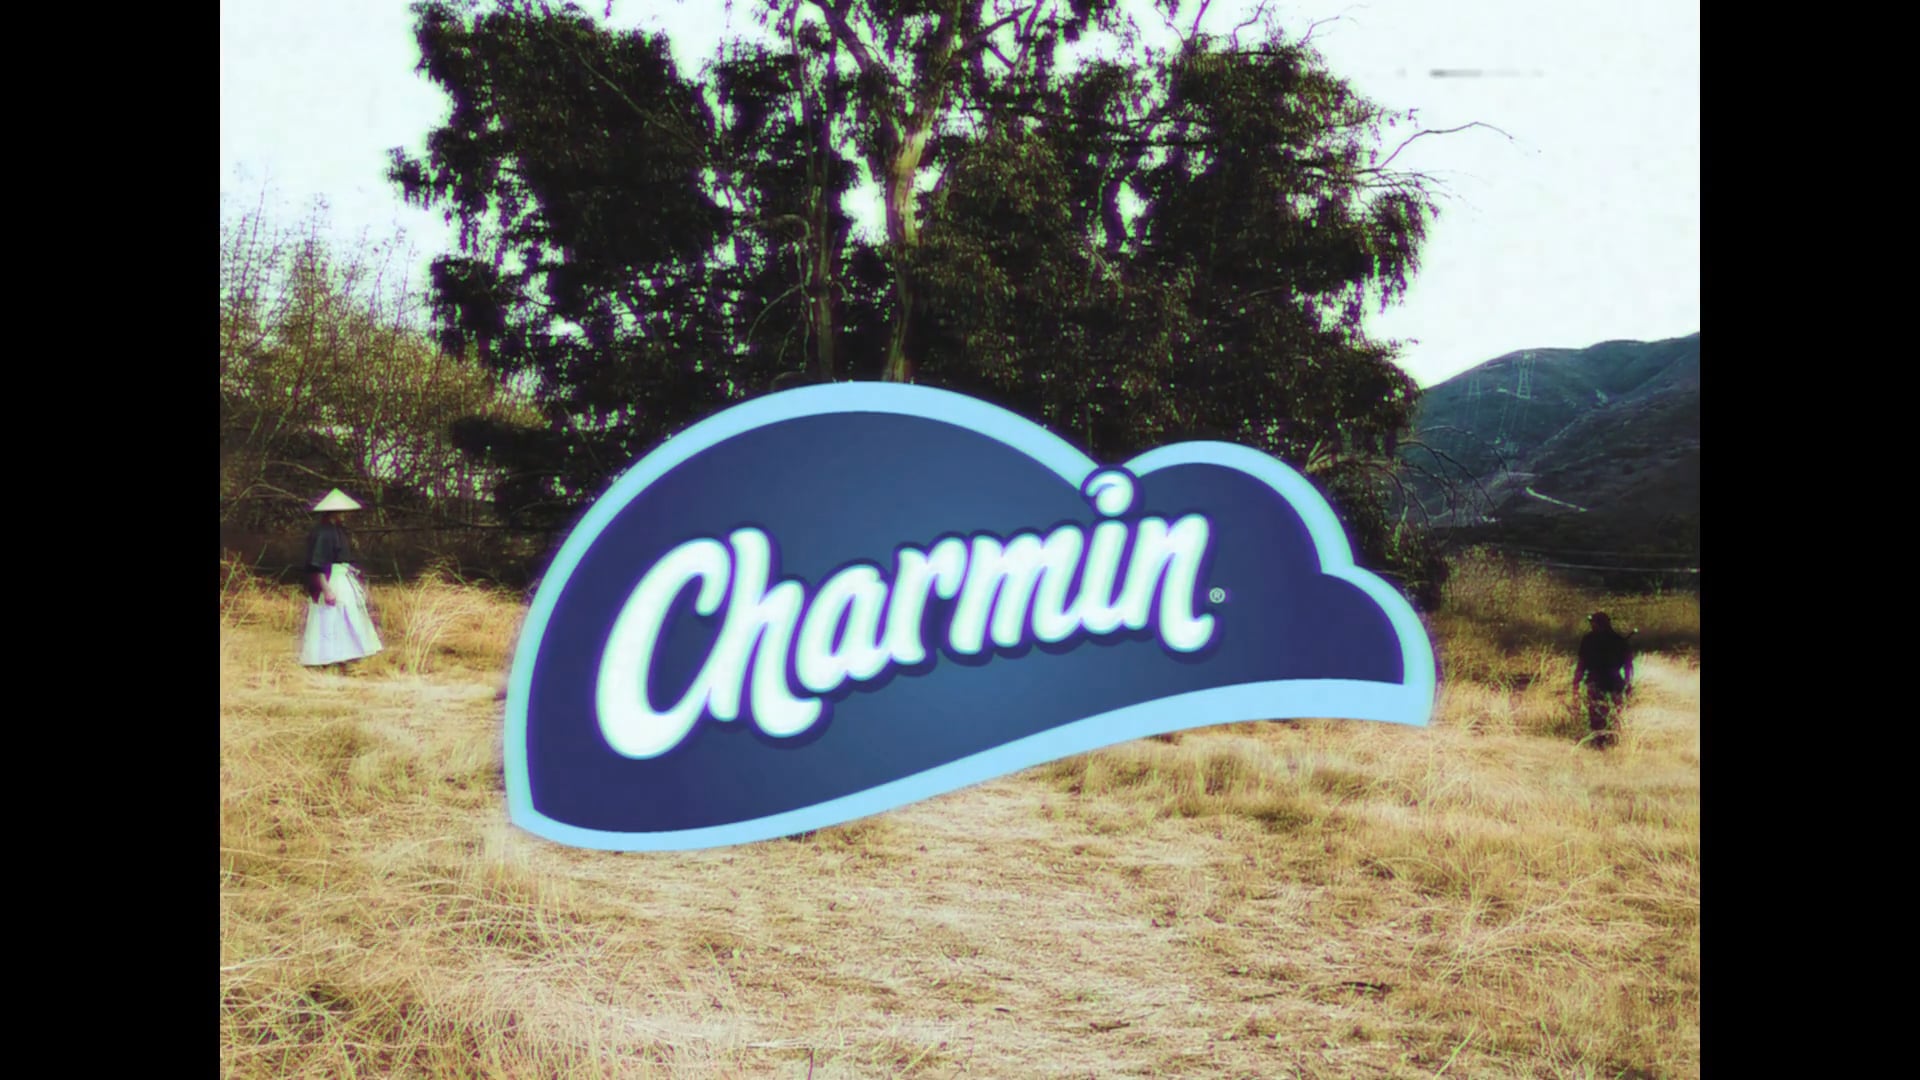 Commercial | Charmin - The Last Roll